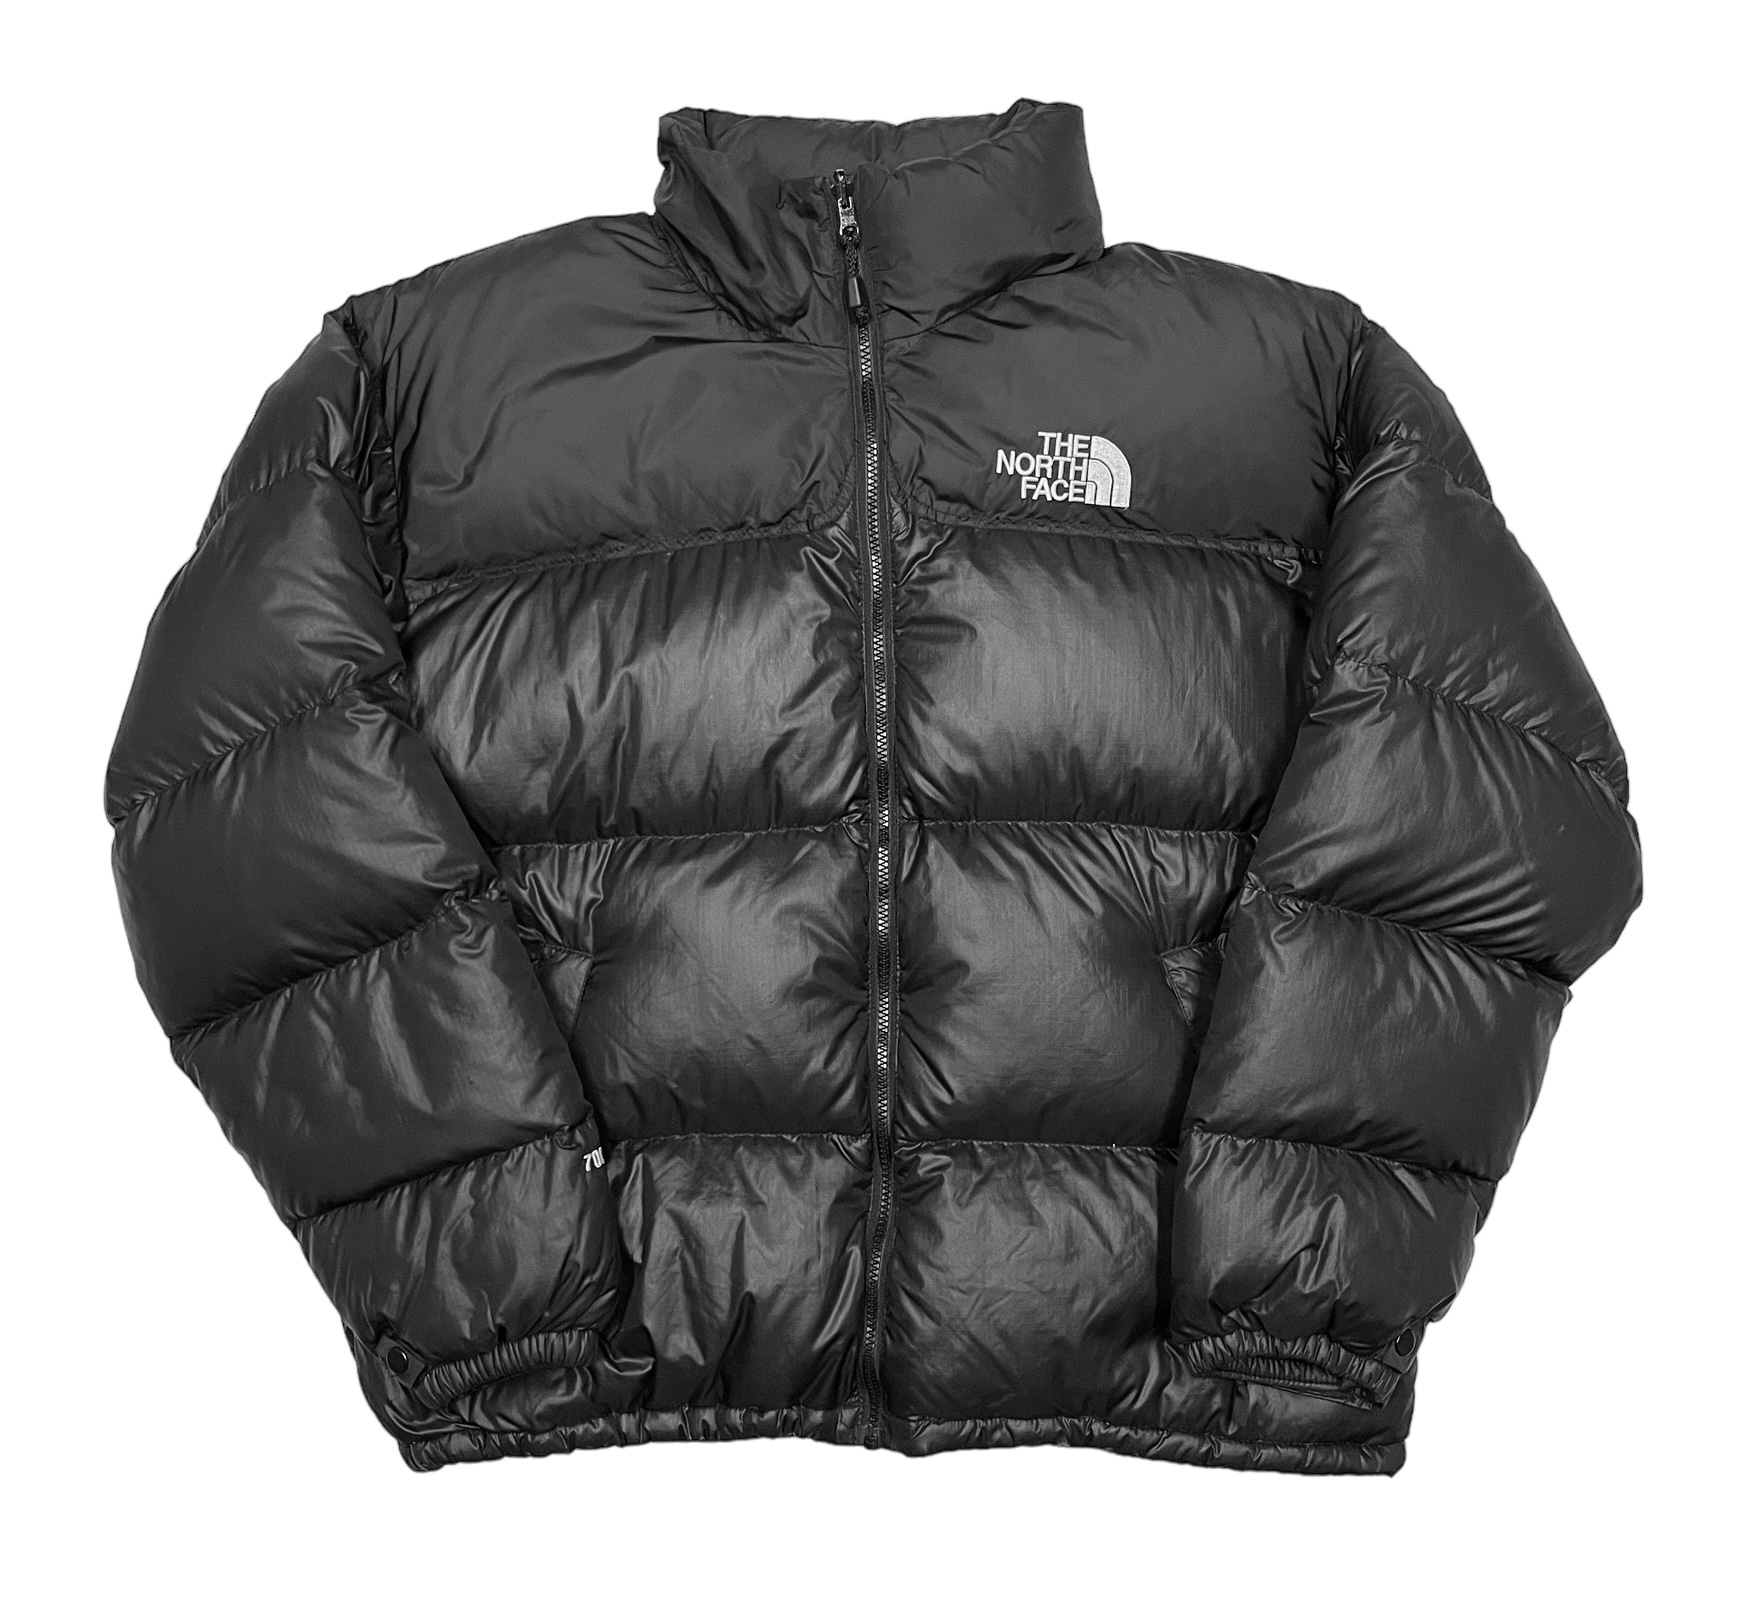 North Face puffer jacket - Lowkey Archives